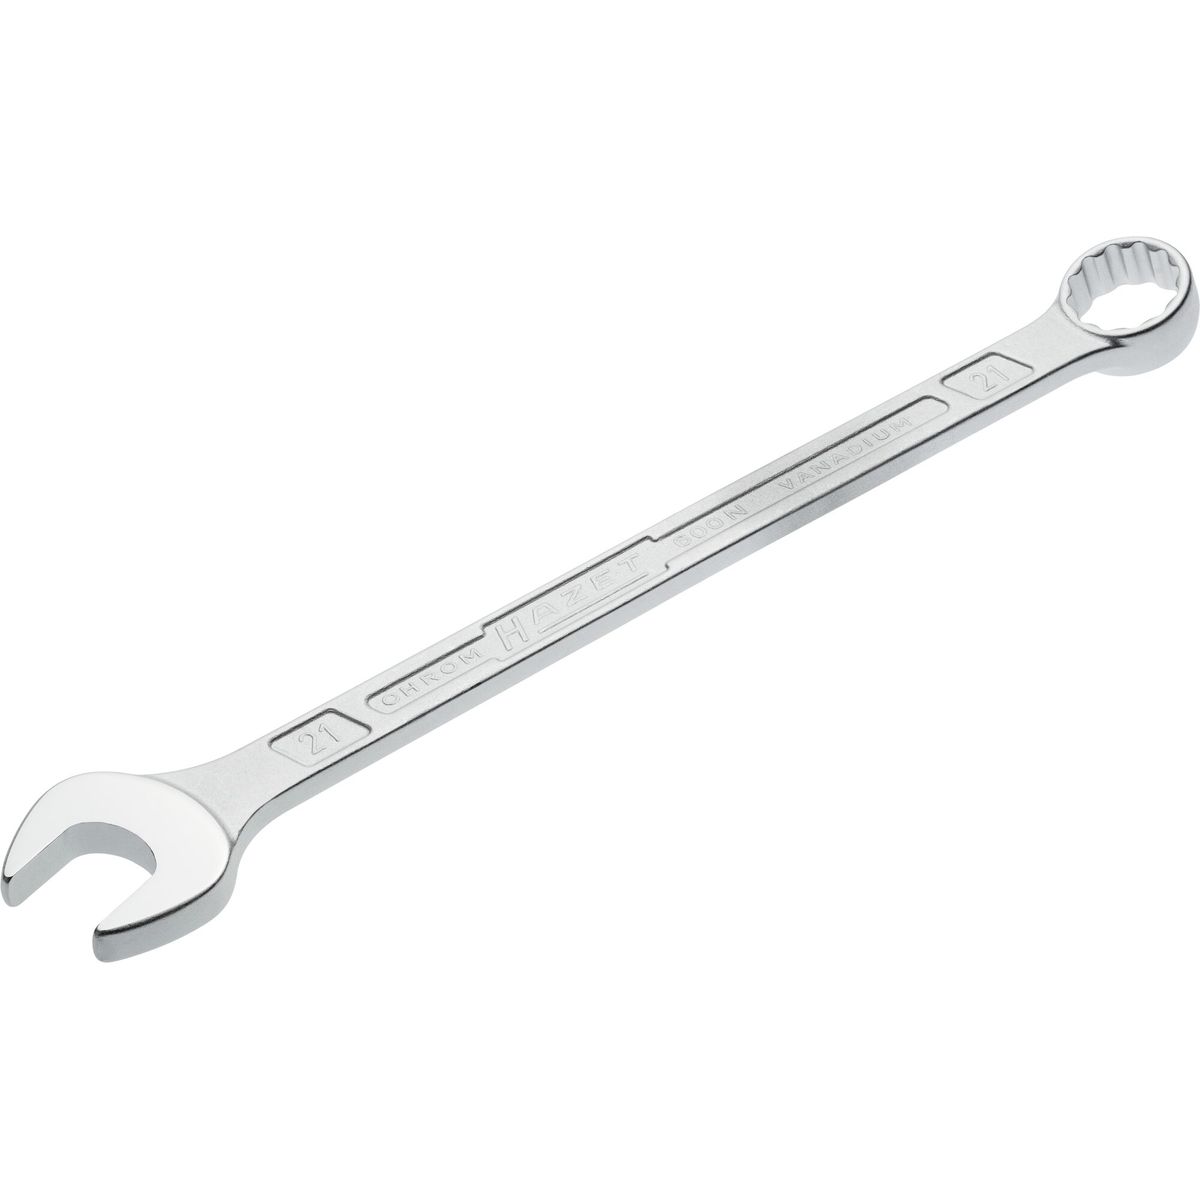 Combination Wrench No.600N-21 Hazet®